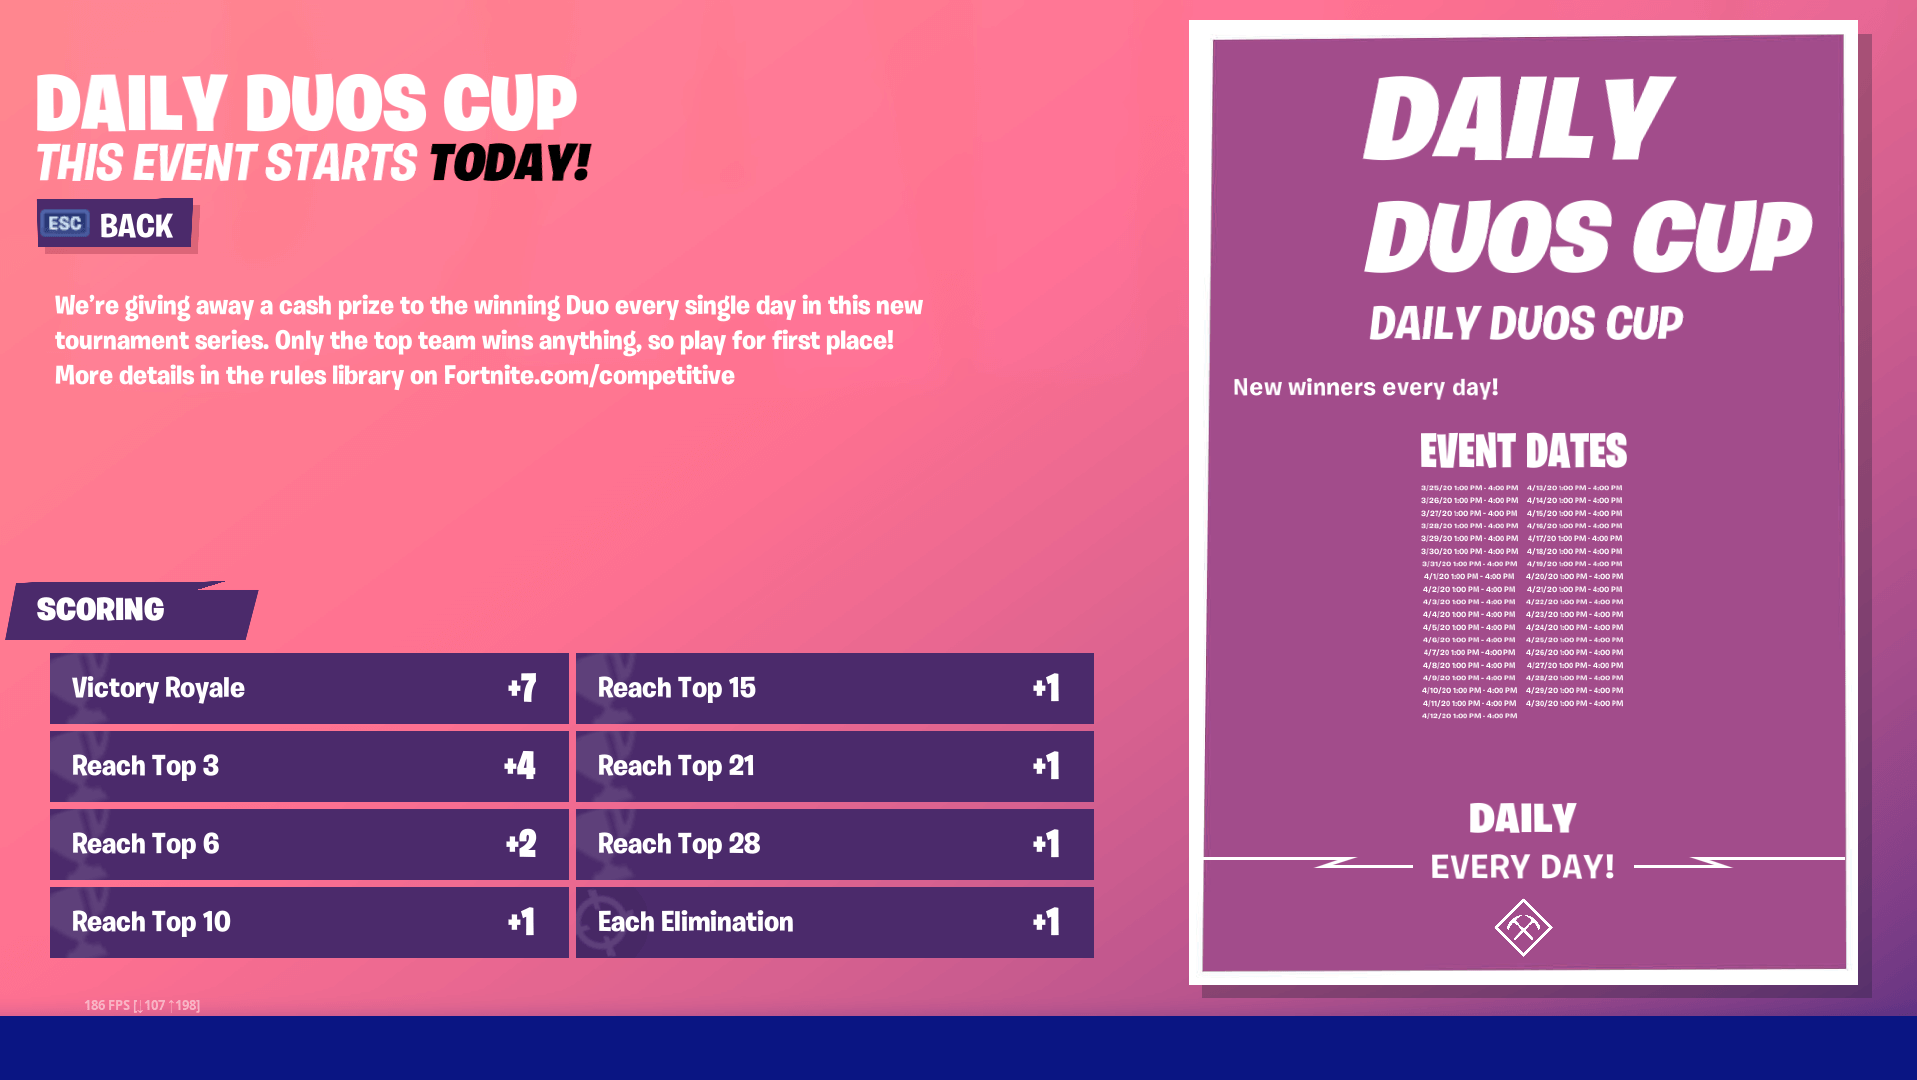 Fortnite RANKED CUP DUOS Tournament! (Playing on Playstation 5 #ad